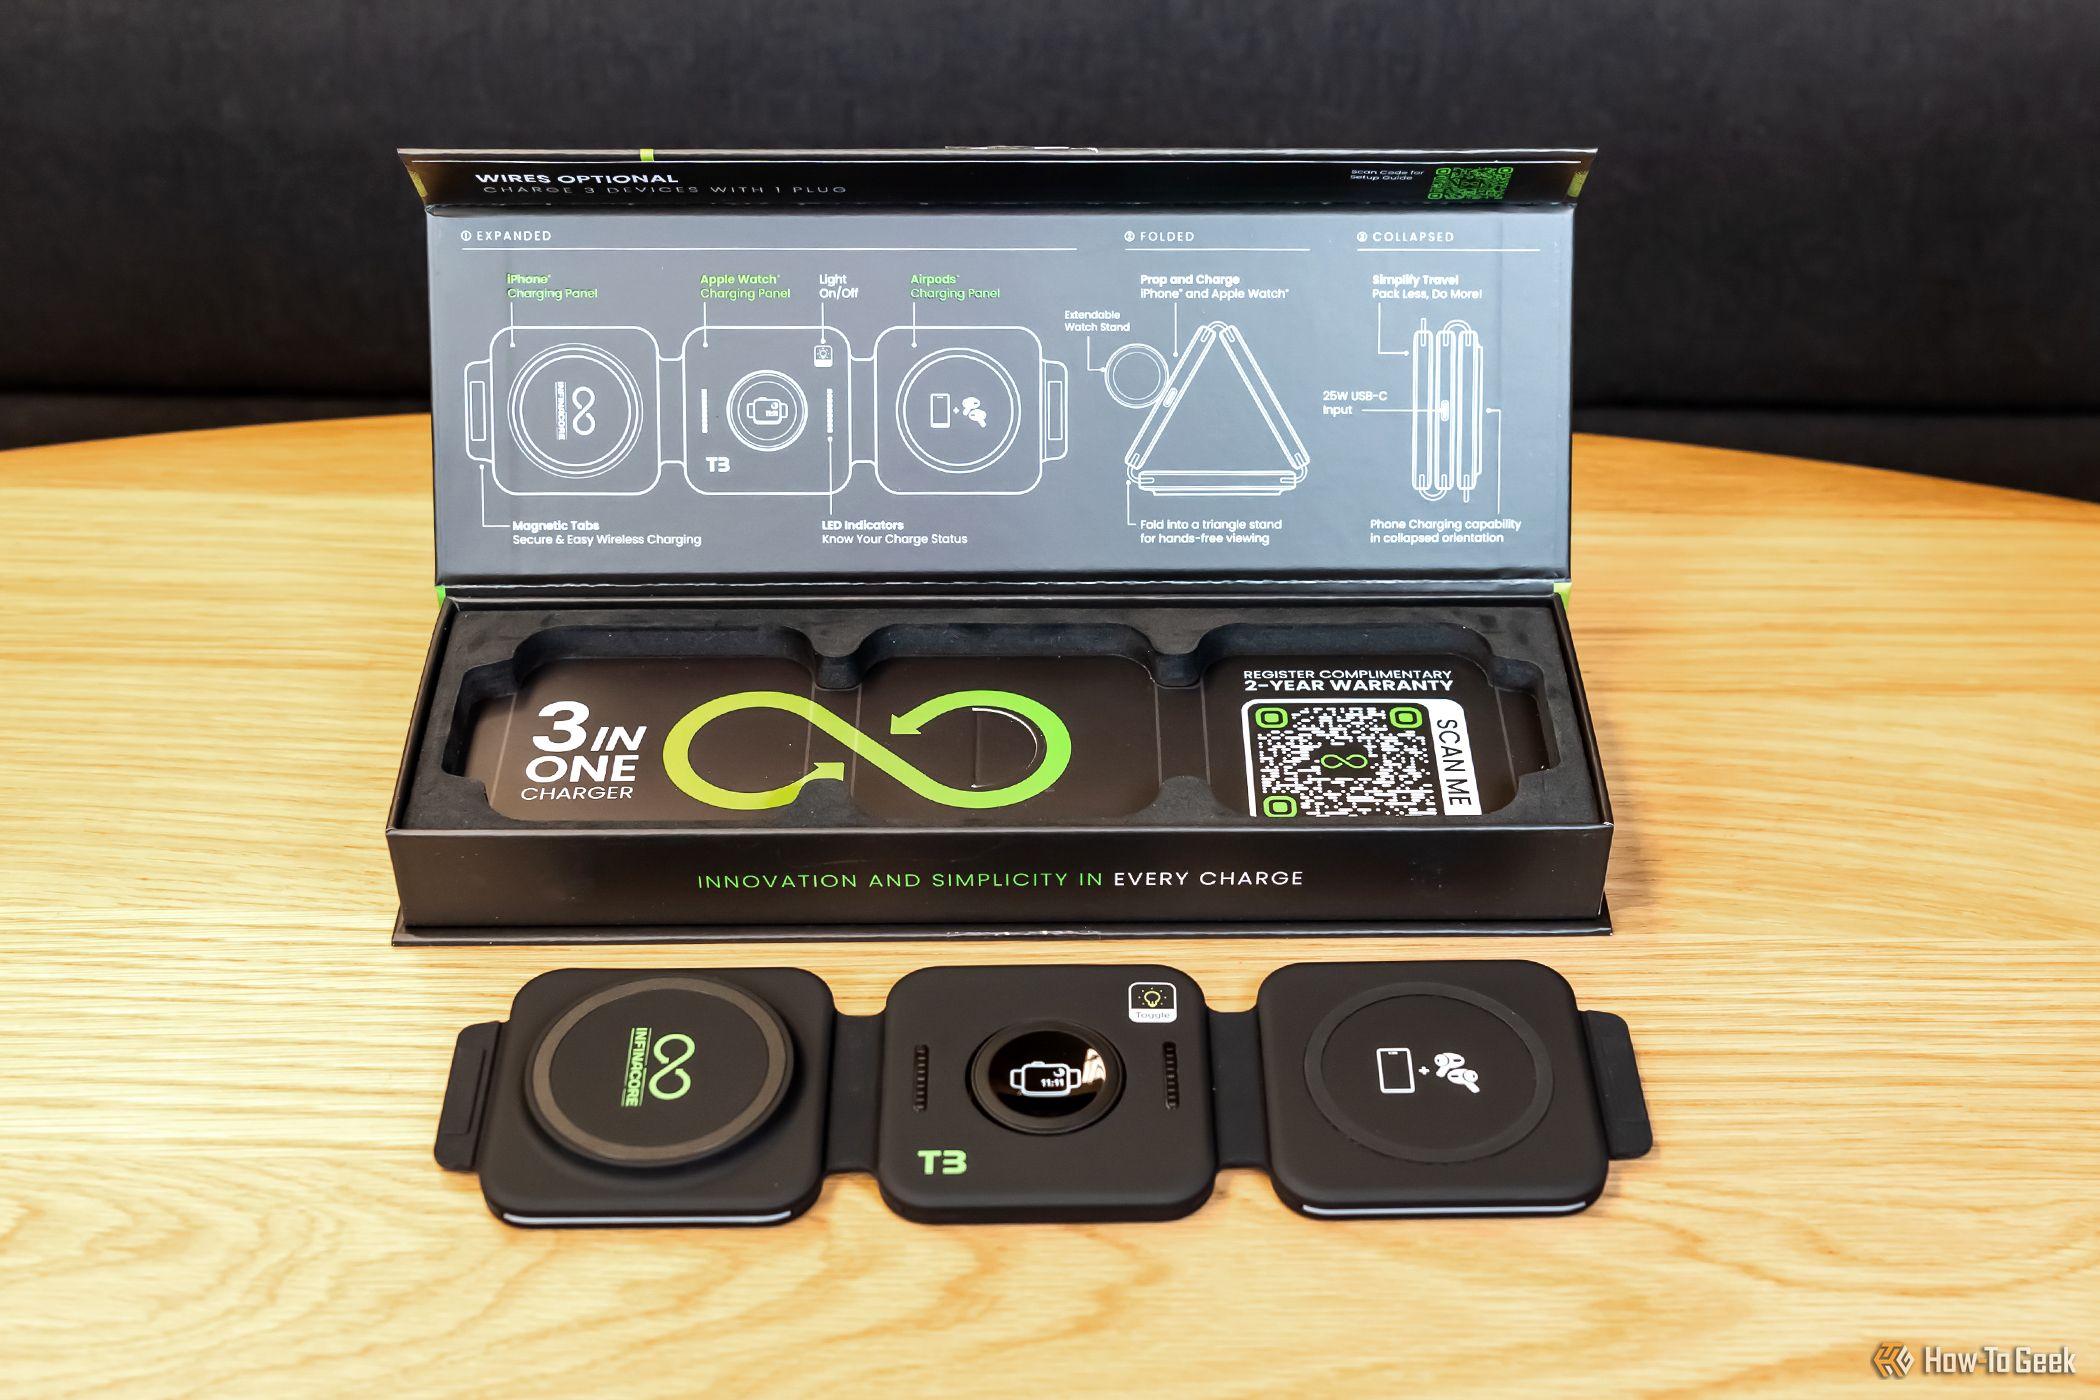 The box for the Infinacore T3 3-in-1 Wireless Charging Station